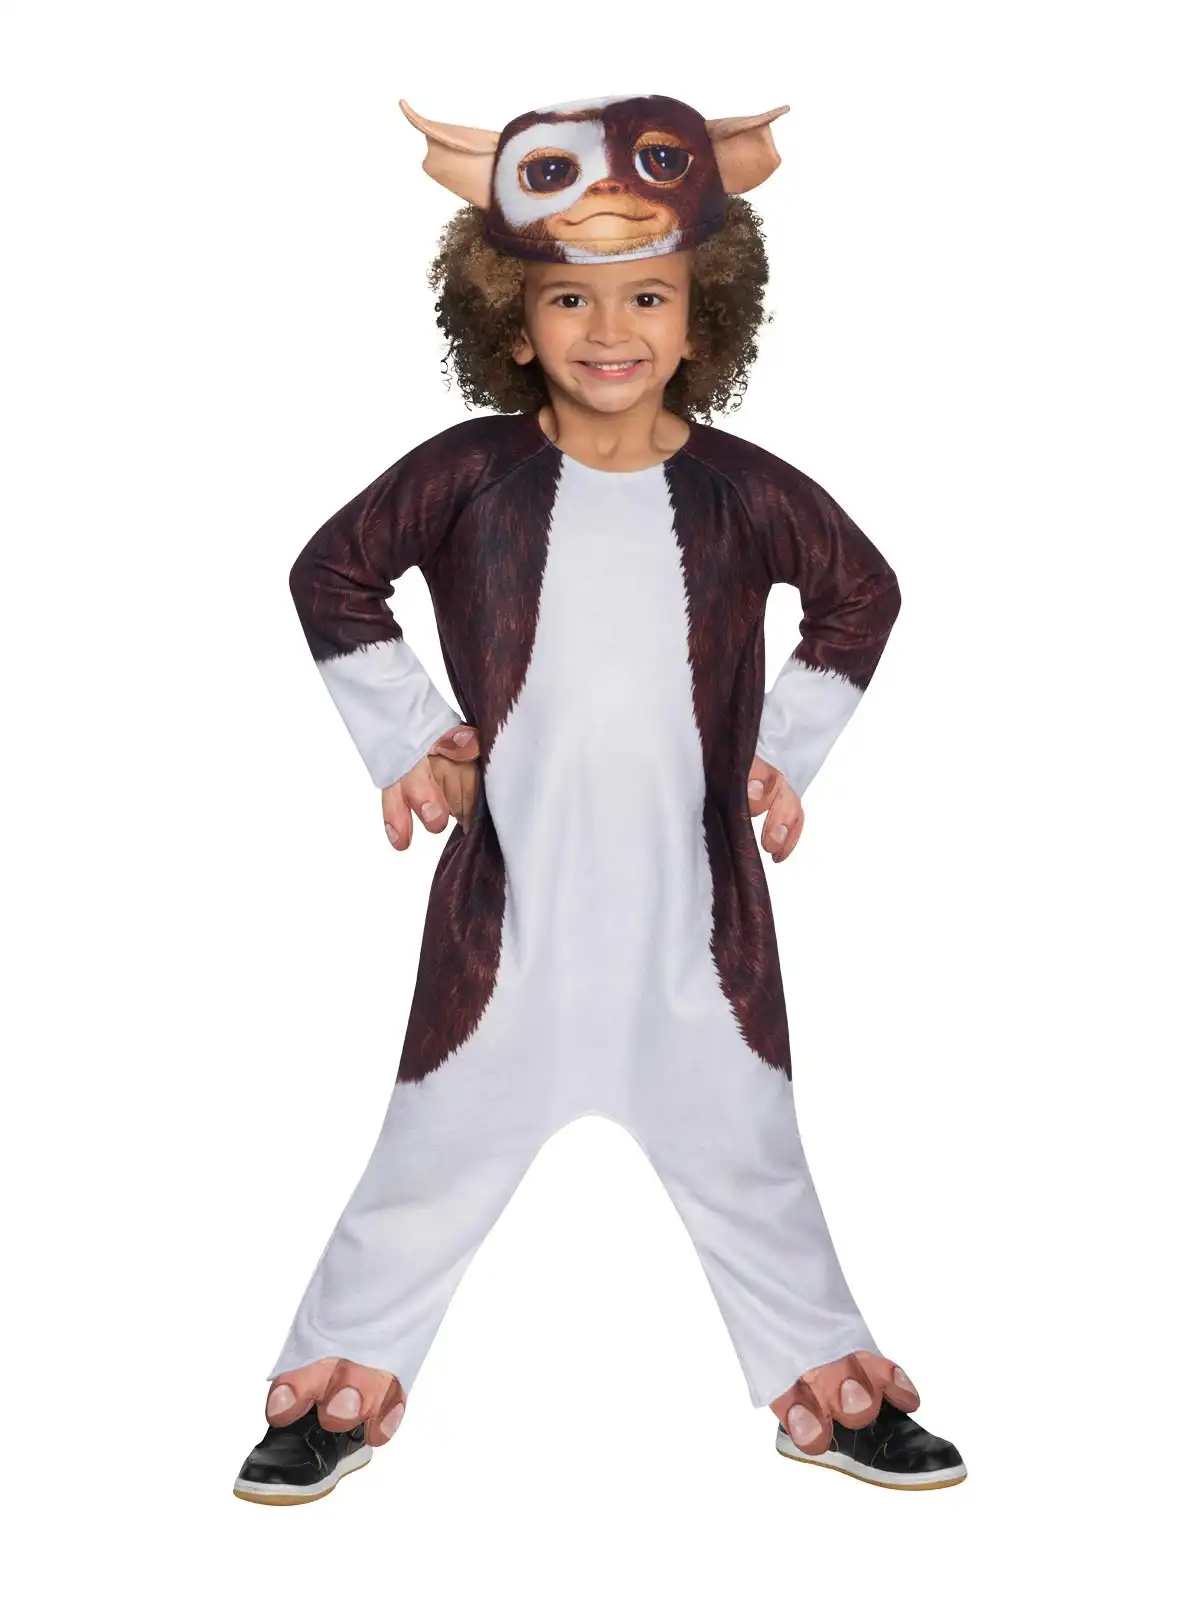 Rubies Gizmo Fury Gremlins Dress Up Party Costume - Size Unisex Toddler/Baby